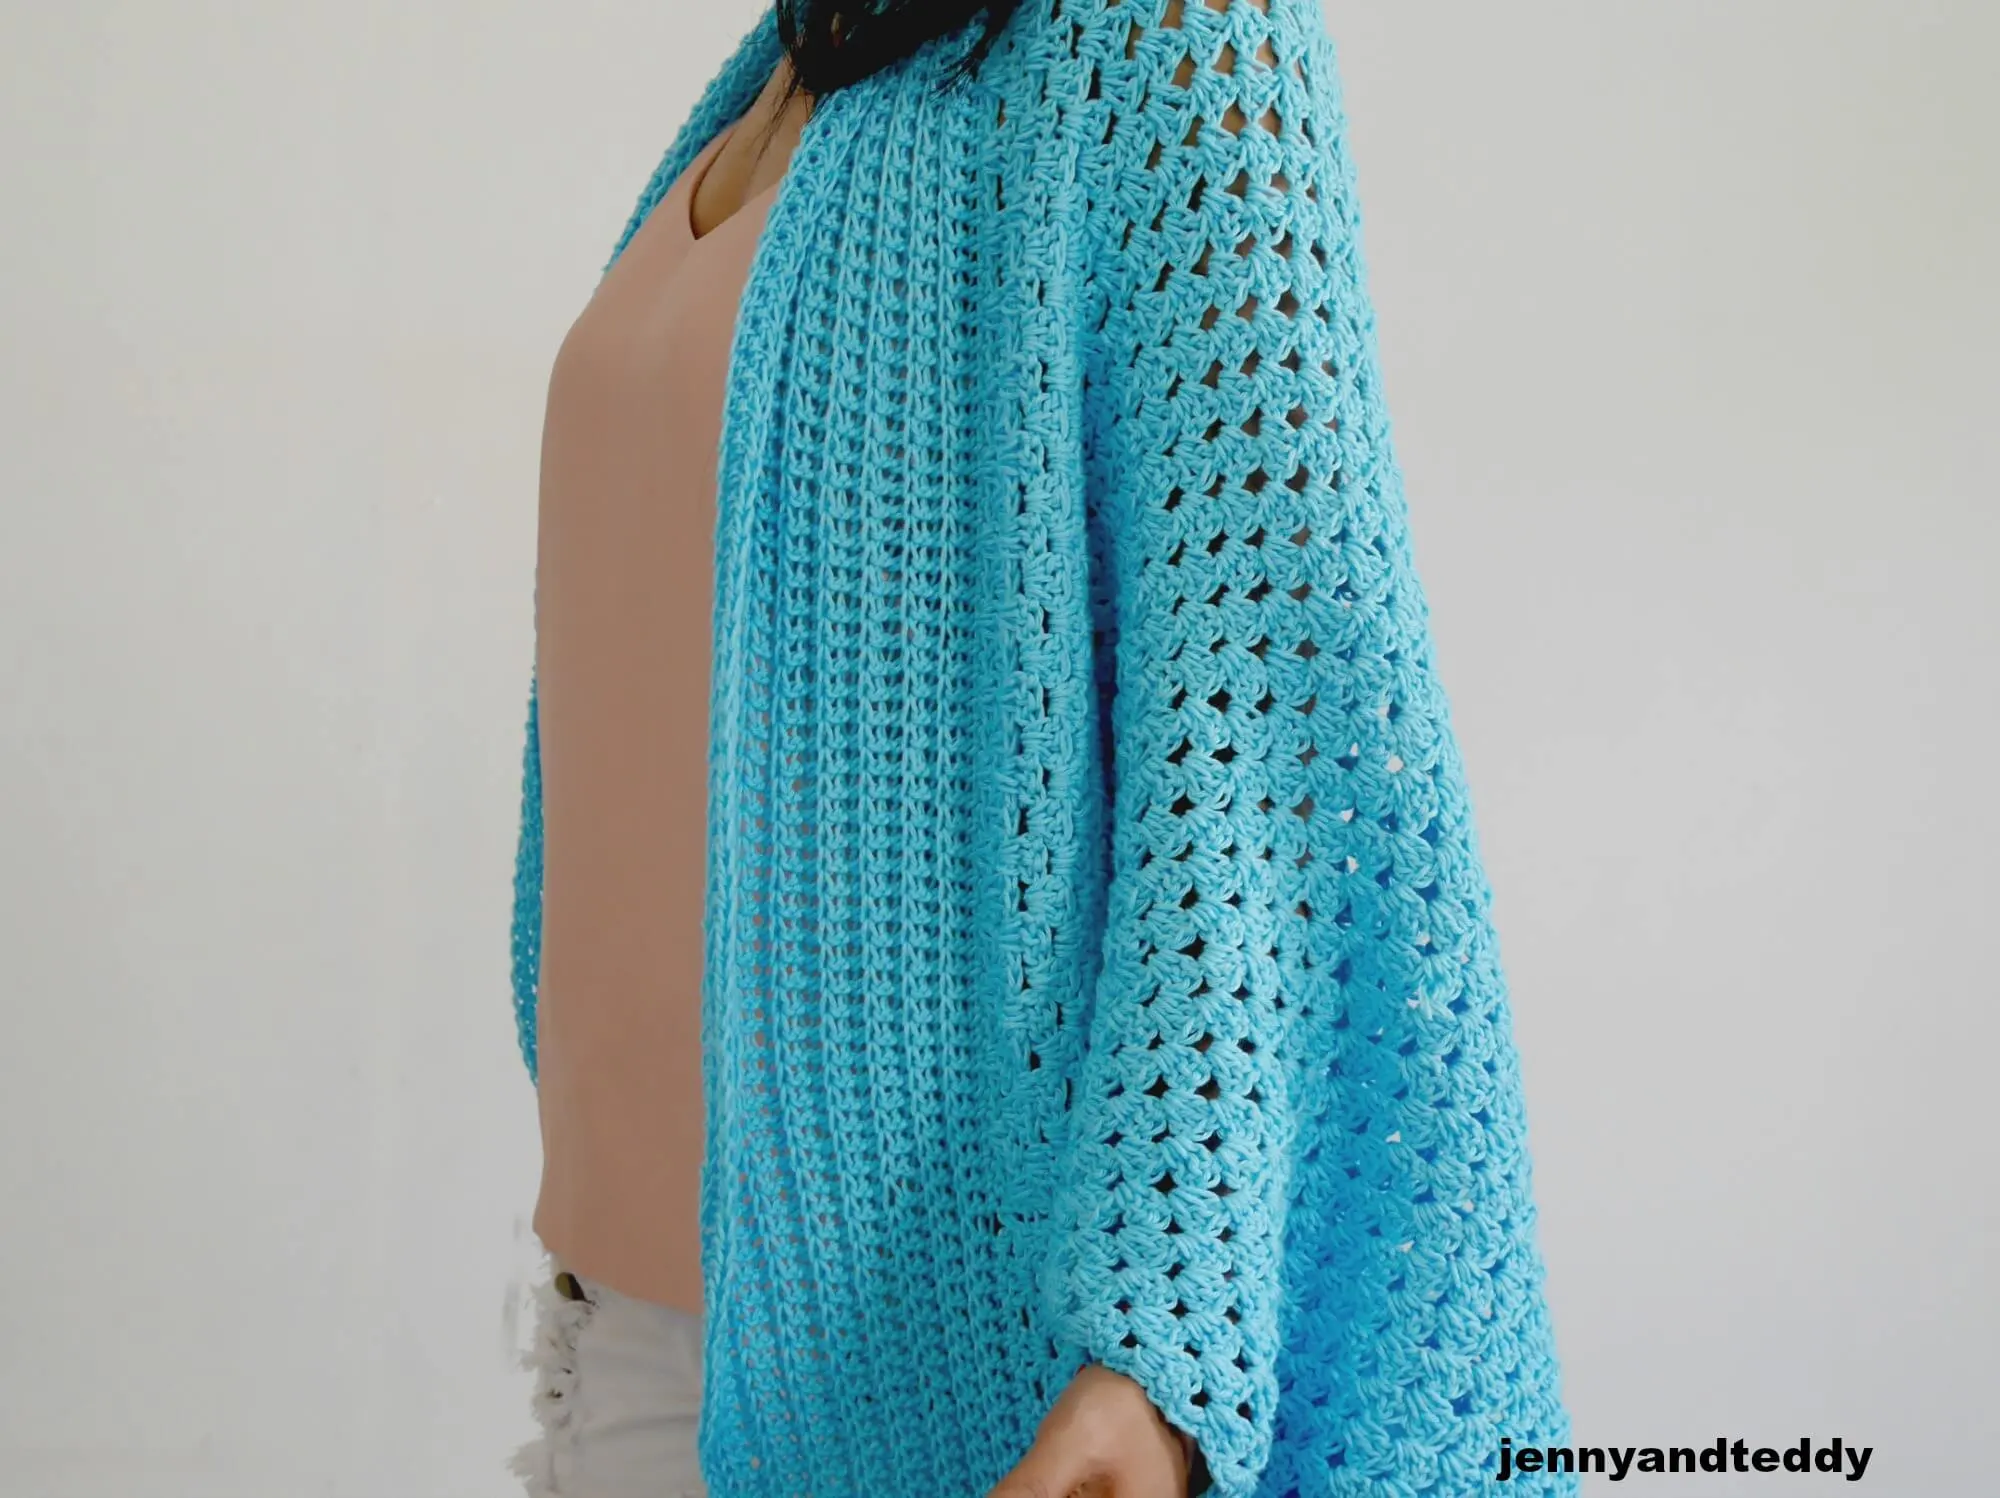  free crochet pattern made from dk weight cotton yarn